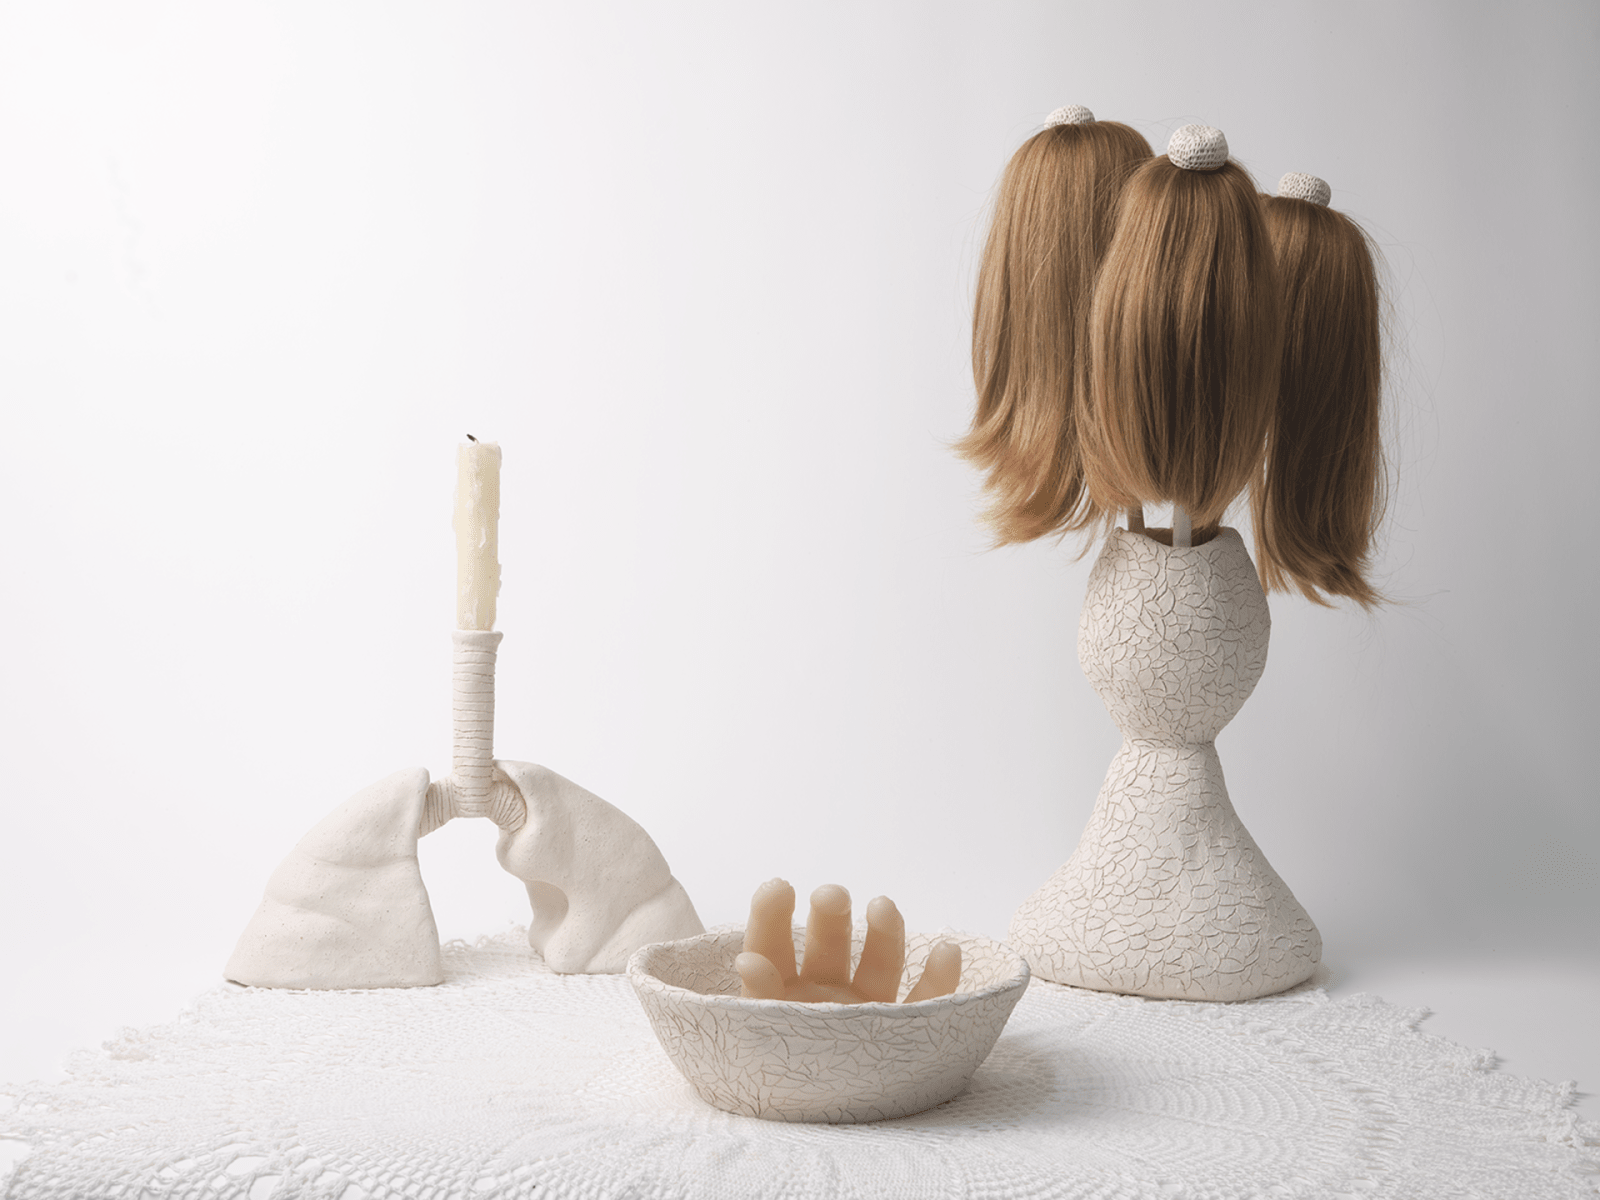 Image of a white candlestick, white bowl with a hand poking out of it, and a white vase containing three short poles with long brown hair attached, on a white round cloth on a white background.